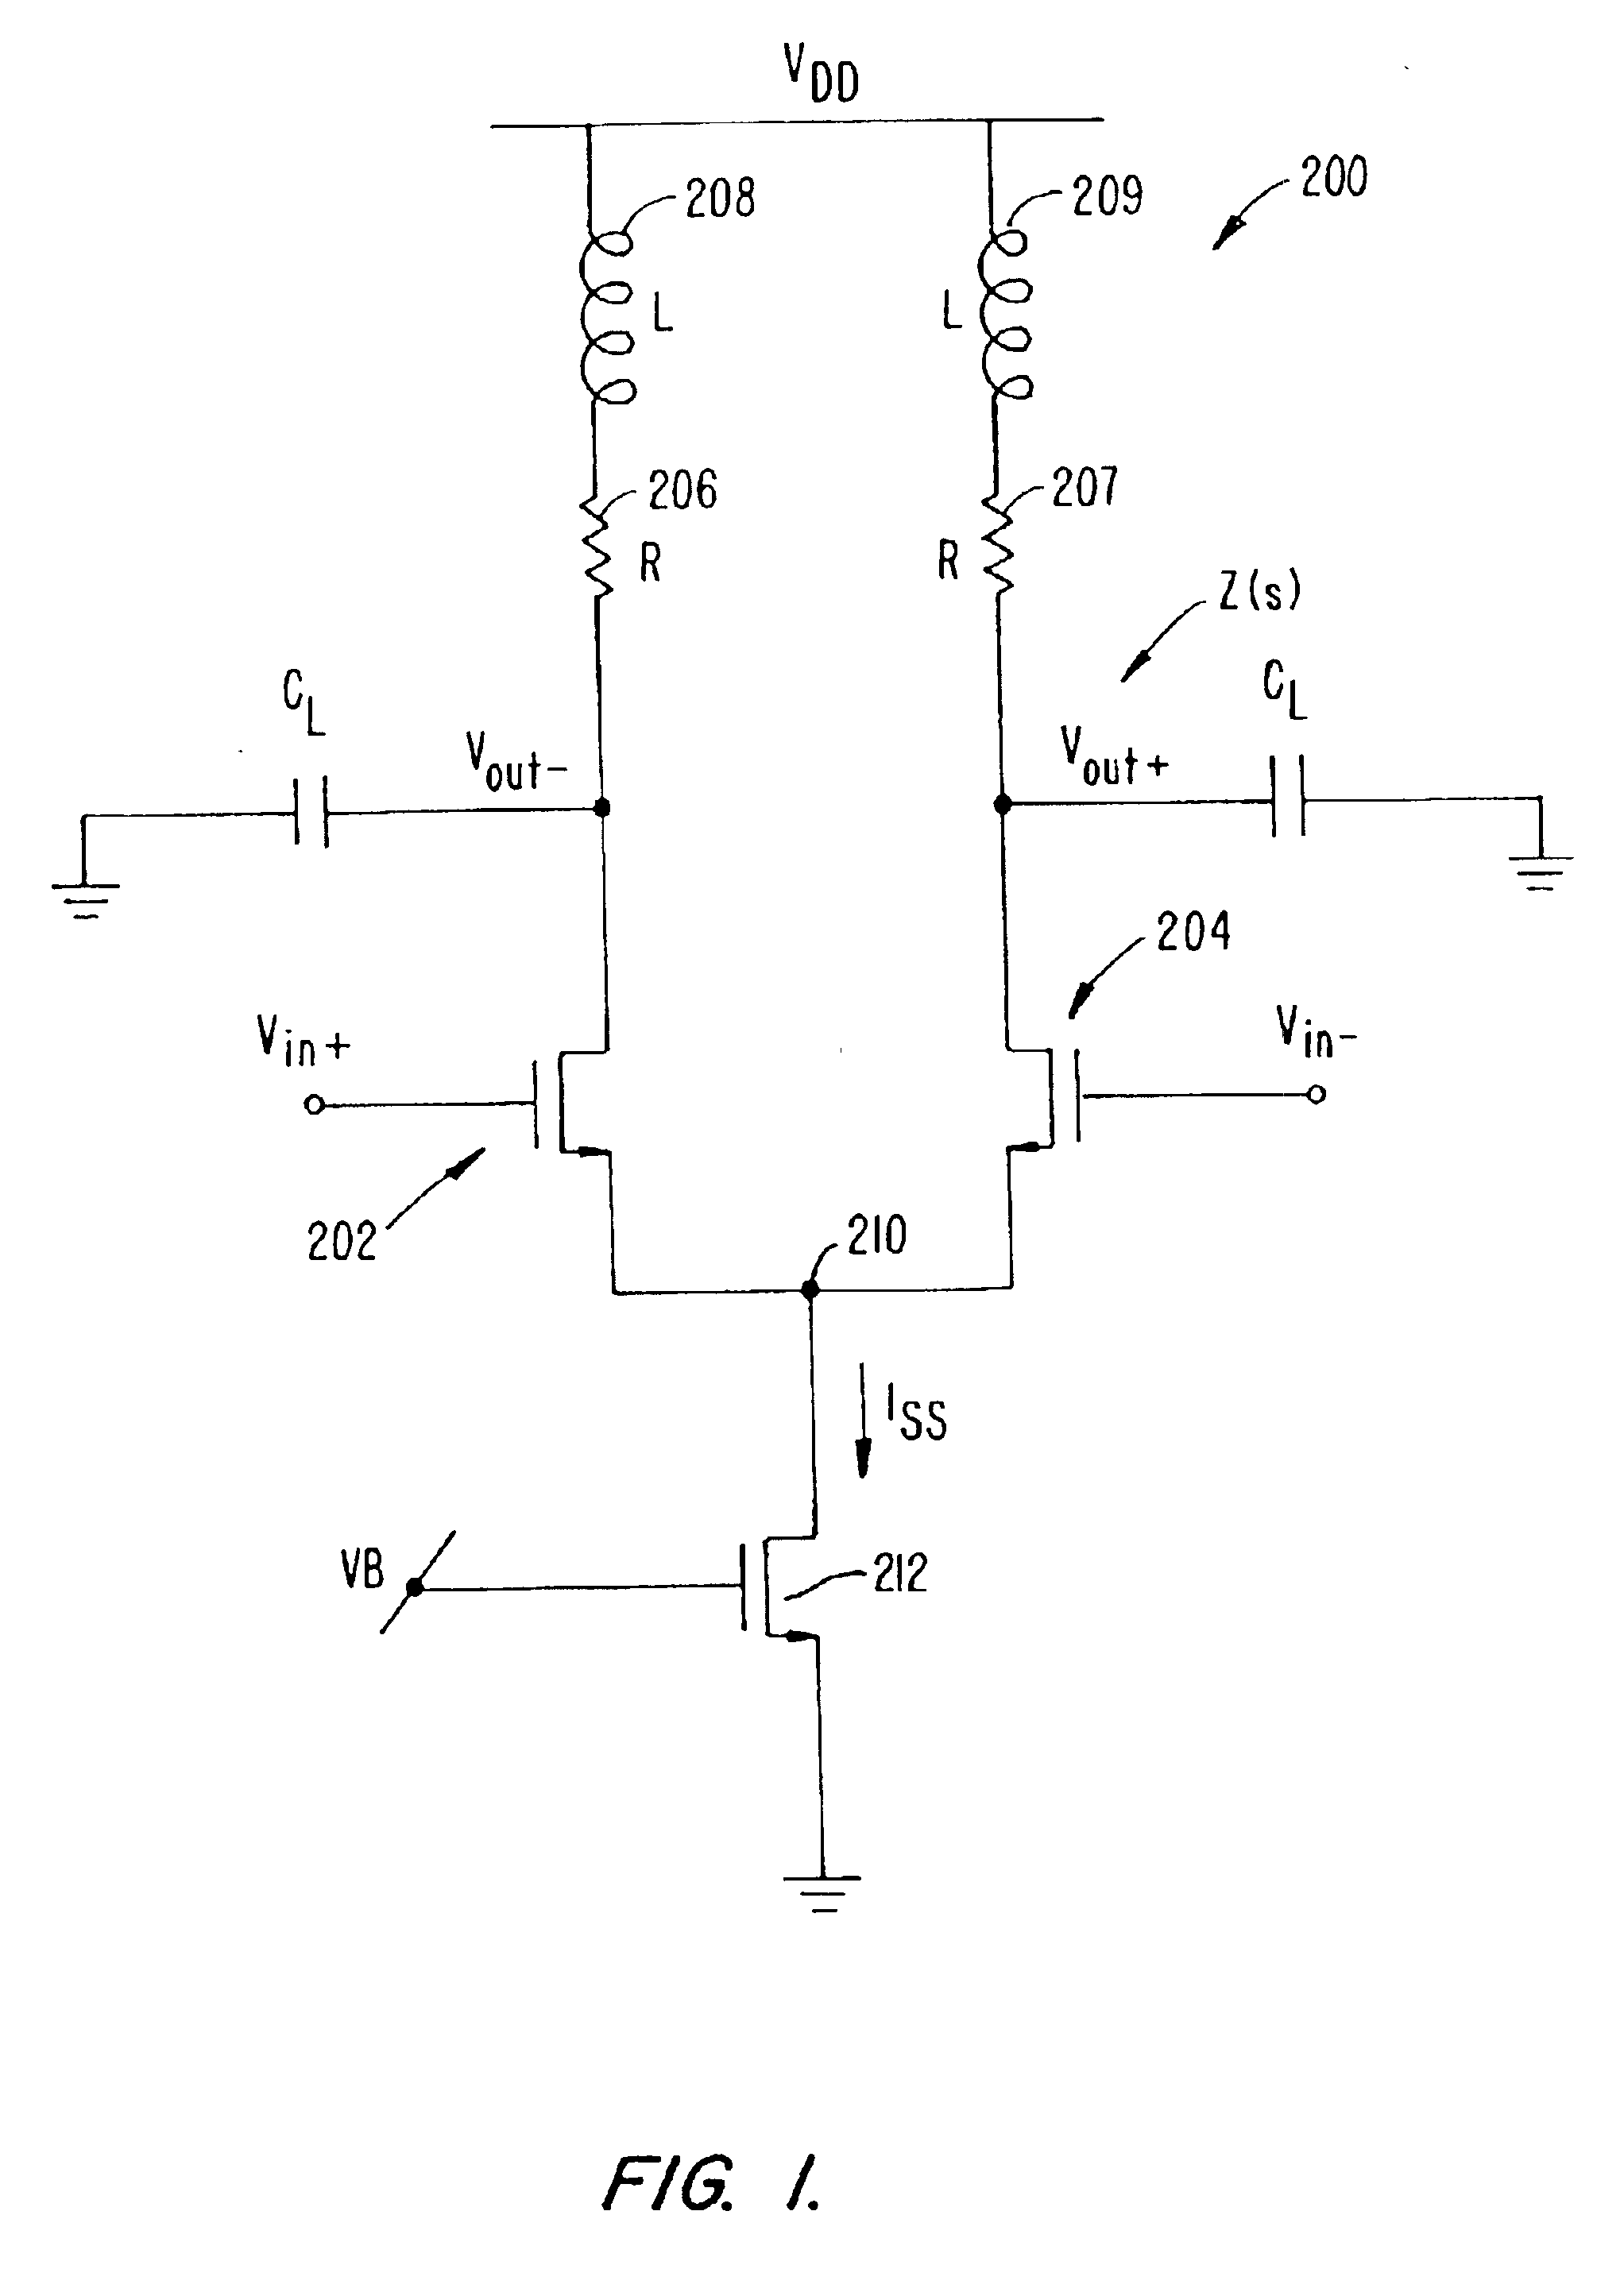 Current-controlled CMOS circuits with inductive broadbanding